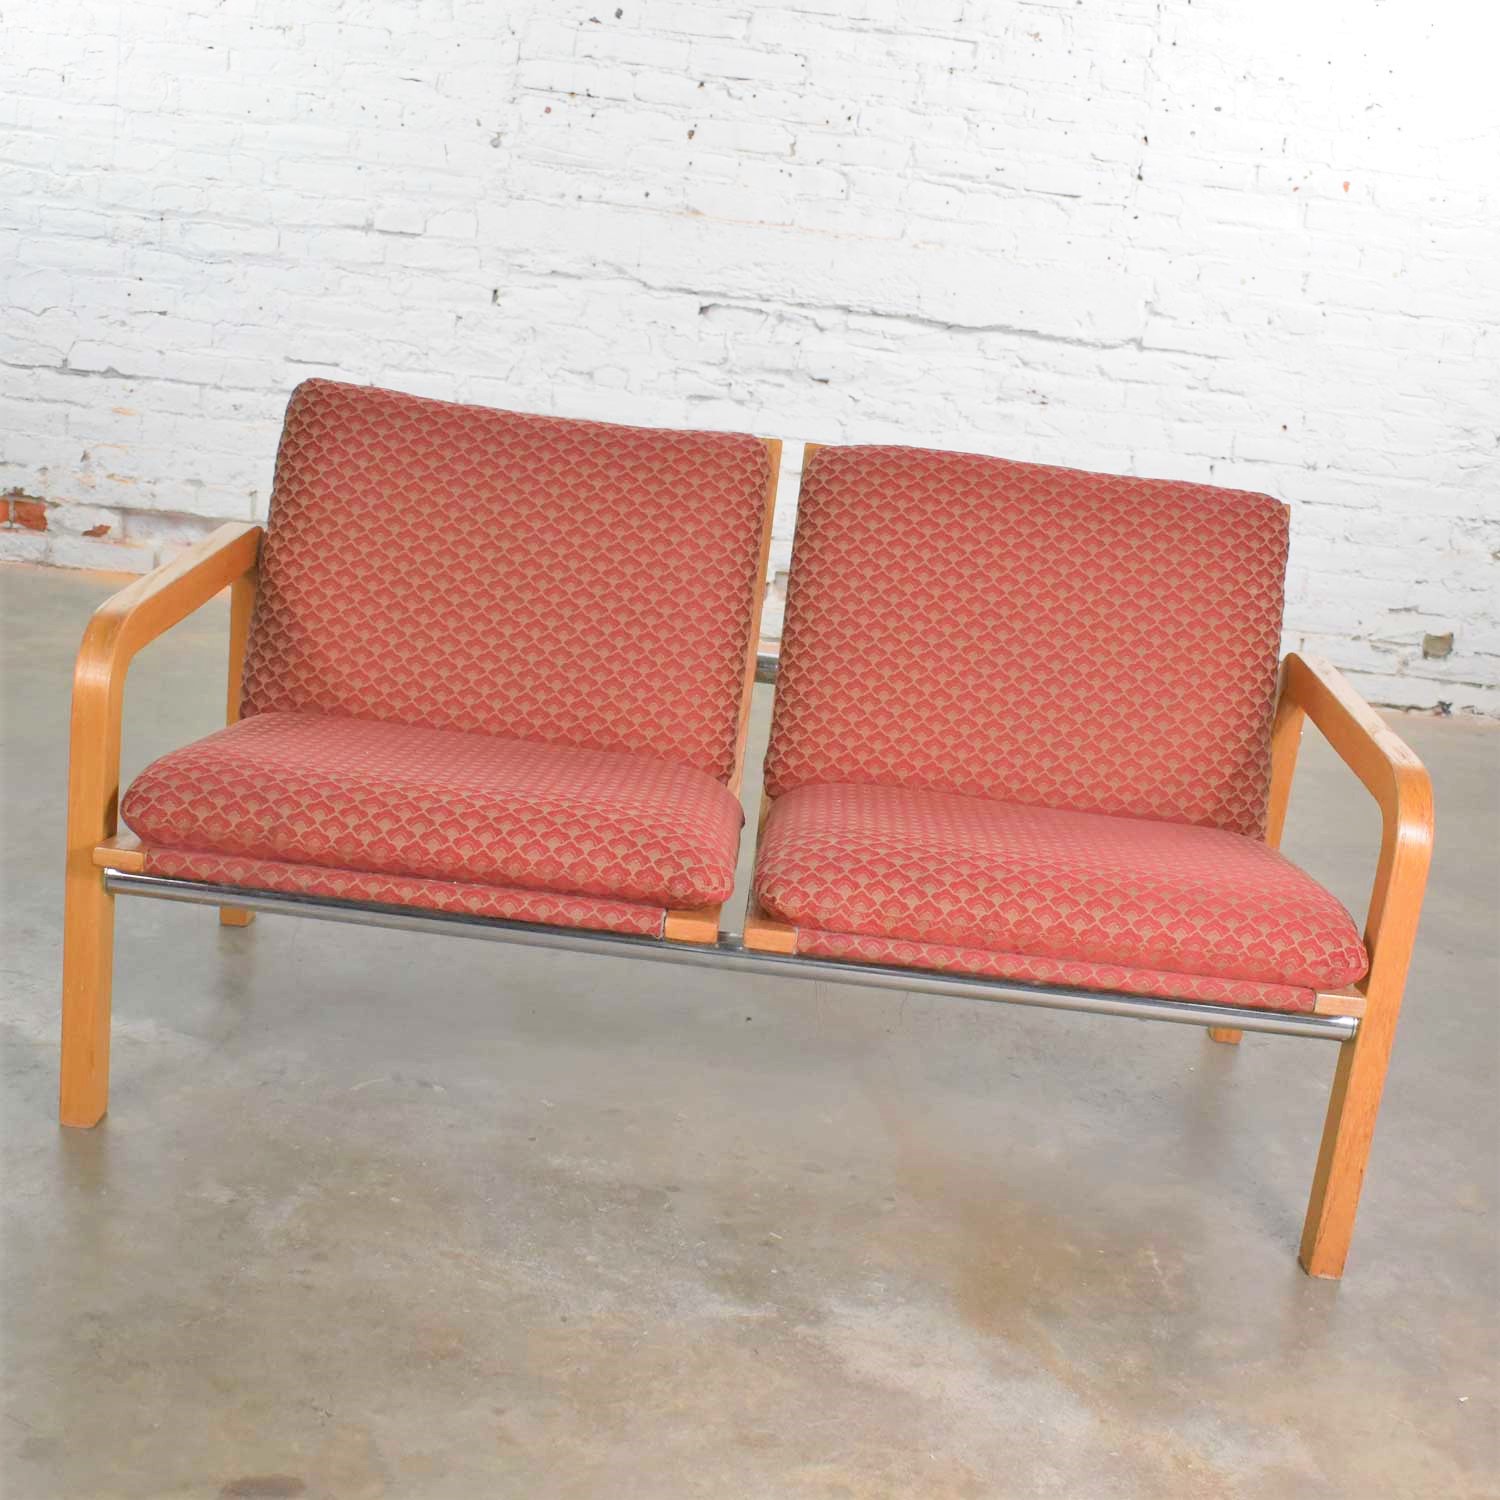 Vintage Modern Oak Bentwood and Chrome Two-Seat Settee or Bench Thonet Attributed